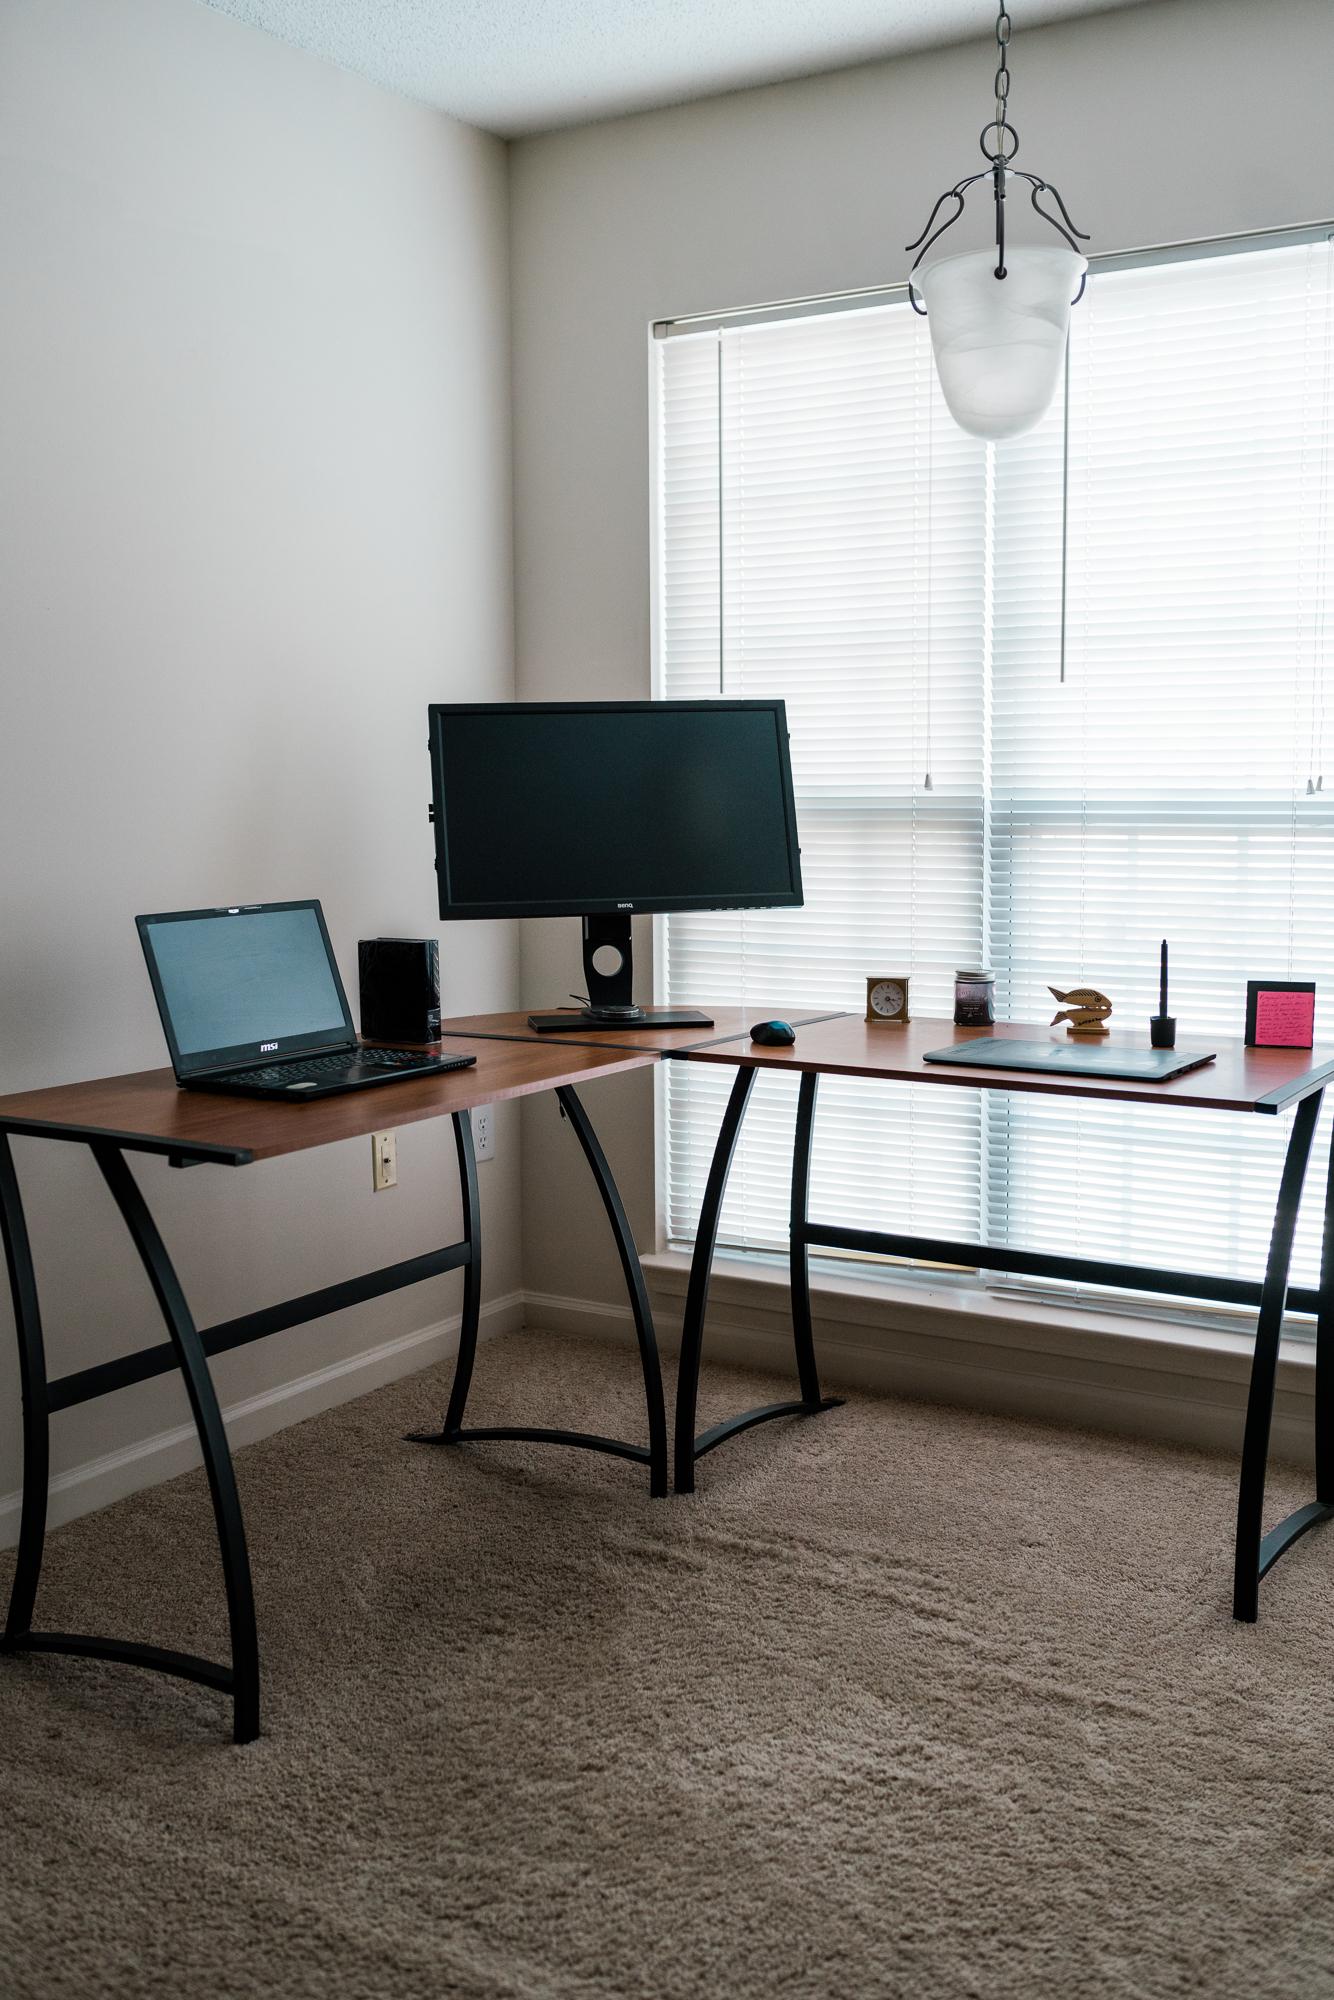 Home office with computers for a photographer